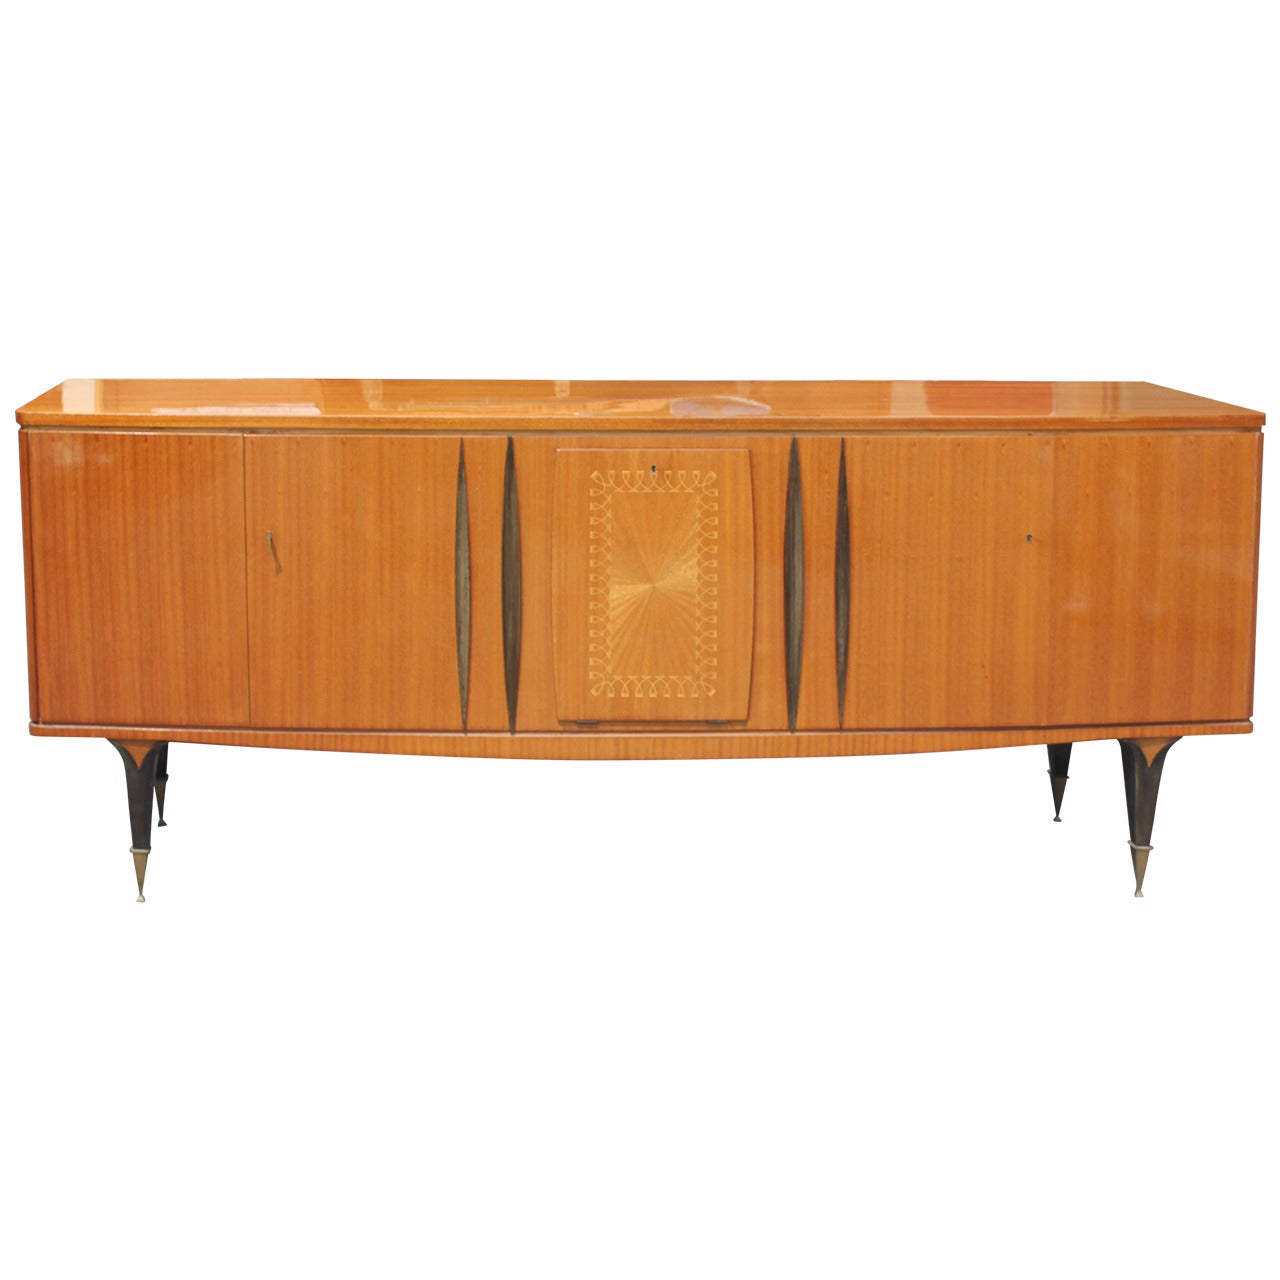 French Art Deco Sideboard / Buffet Grand Scale Flame Mahogany, circa 1940.